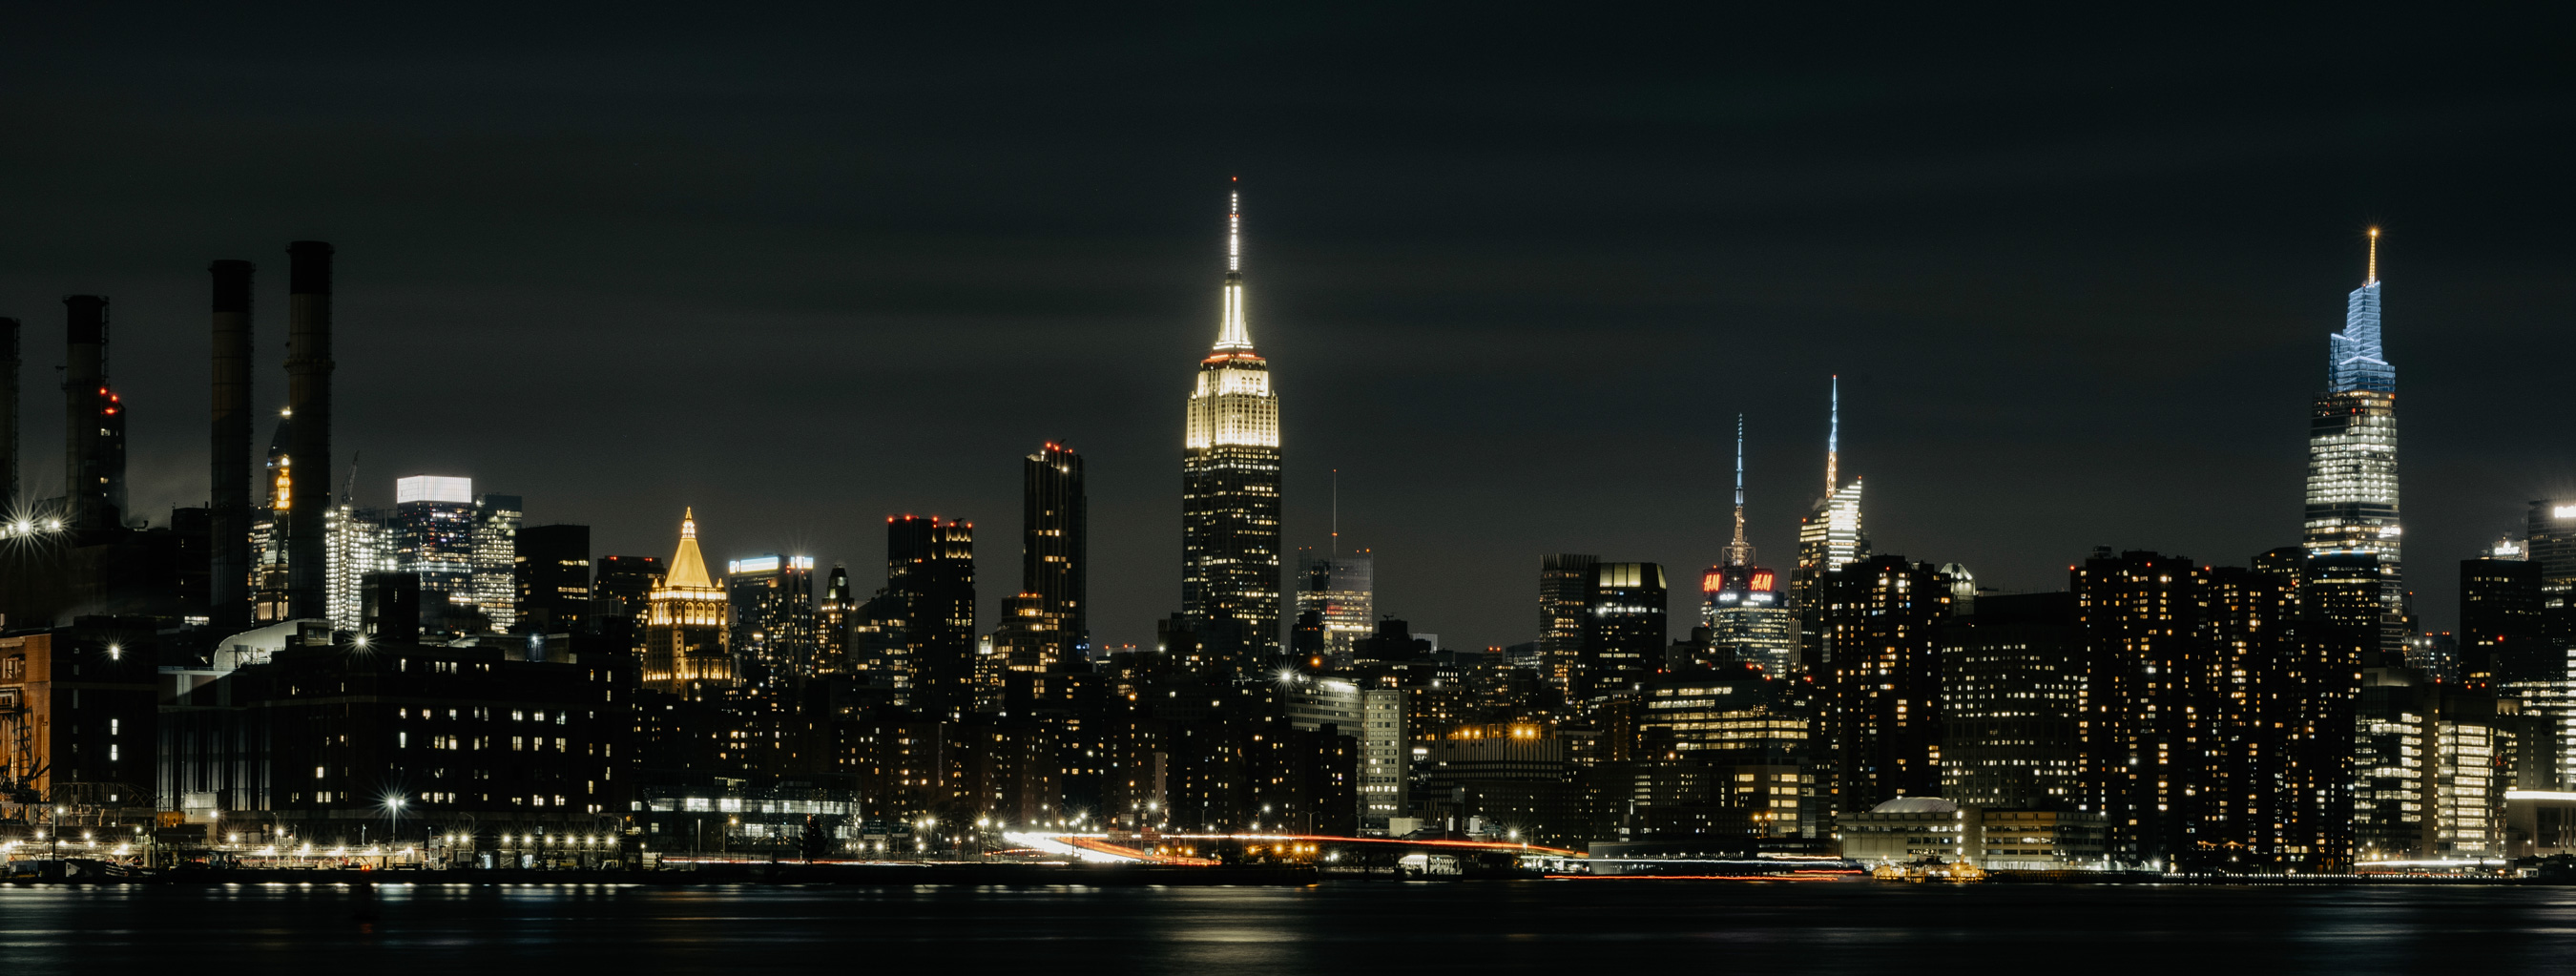 Our beautiful city - captured by me @viewfinder.nyc